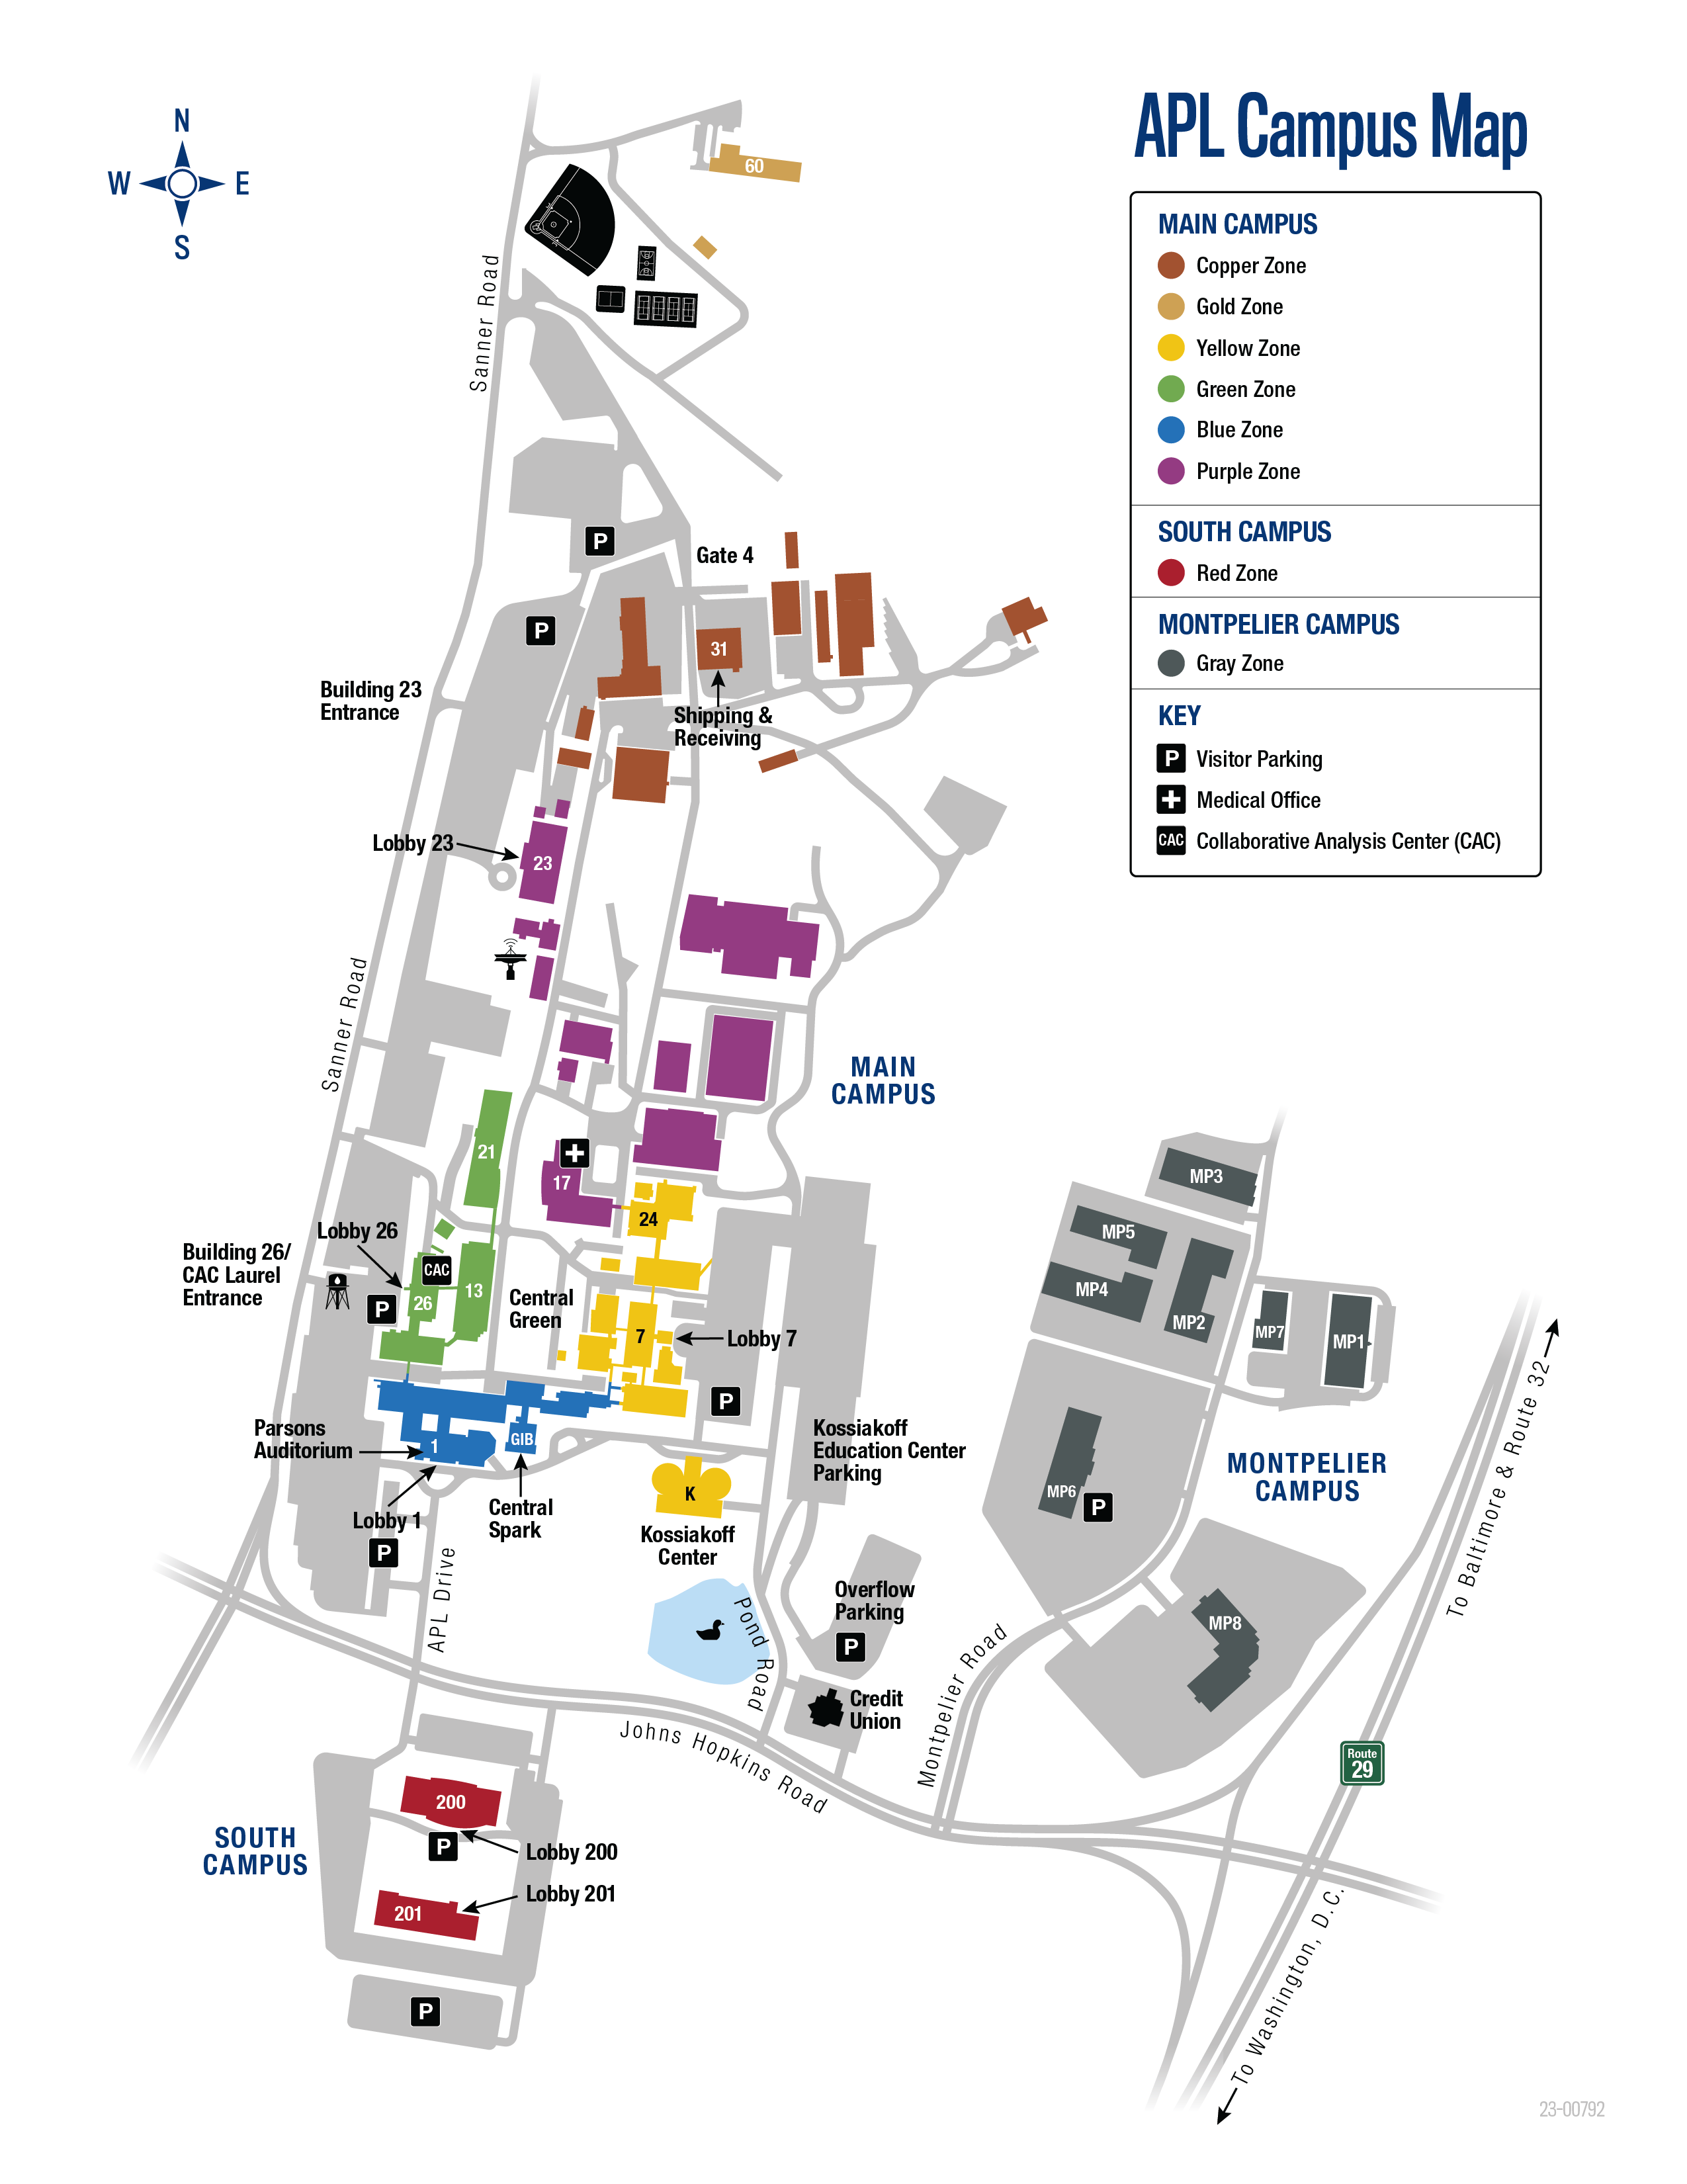 Map of Johns Hopkins APL’s main campus in Laurel, Maryland. APL is located on Johns Hopkins Road, between Sanner Road and Montpelier Road, approximately ½ mile west of U.S. Route 29. Colors for wayfinding zones are marked in the legend.